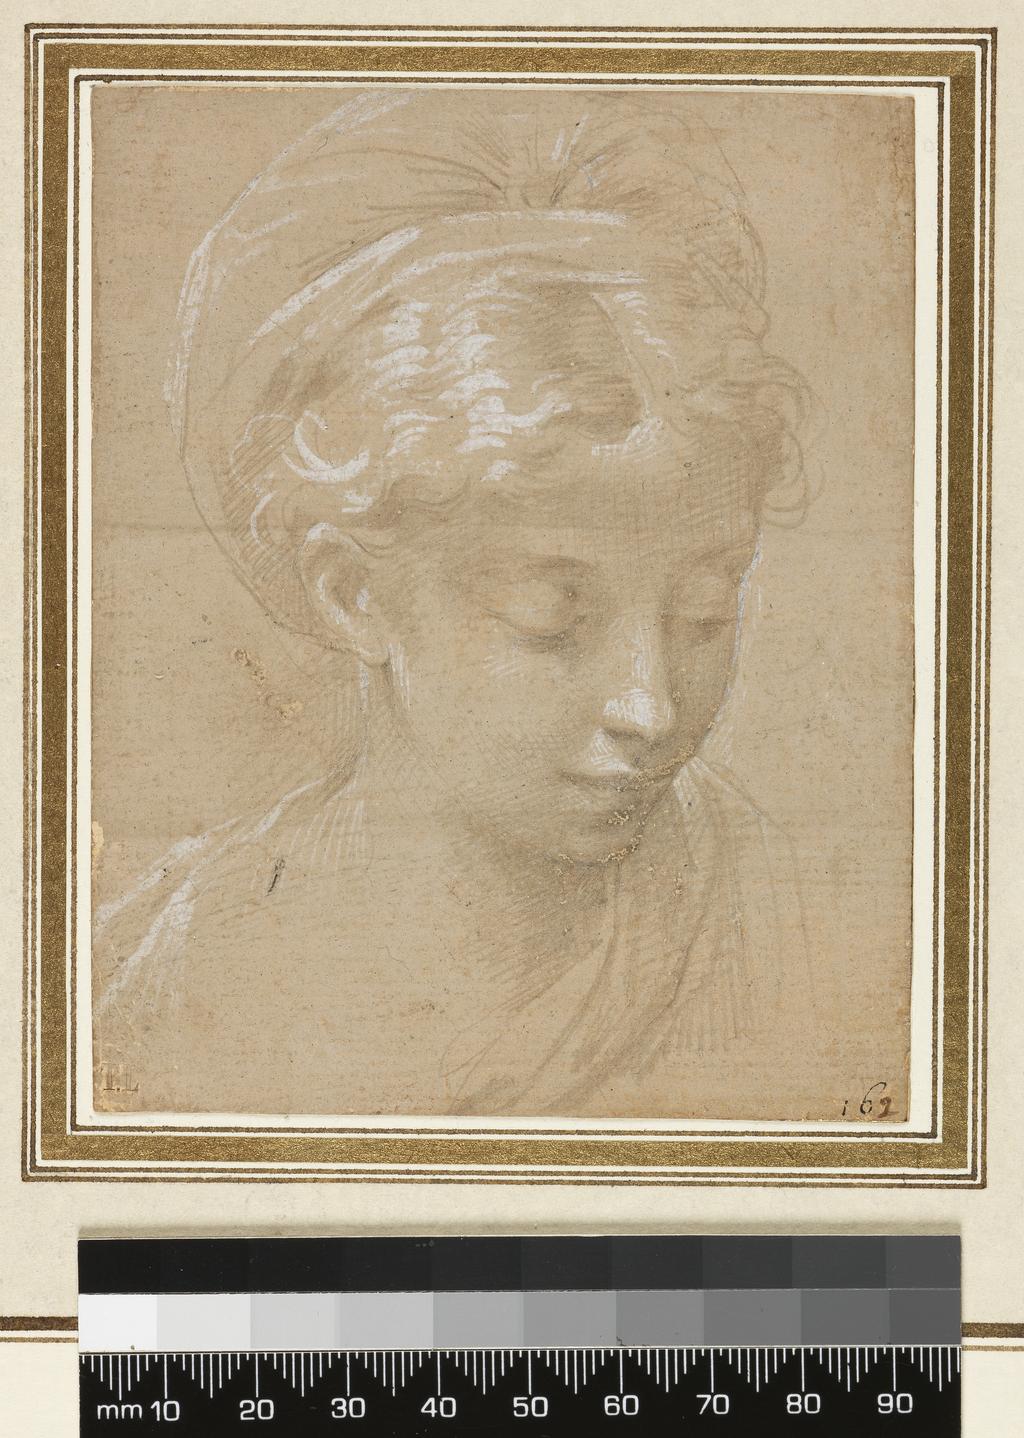 An image of Head of a Young Woman. Parmigianino (Francesco Mazzola) (Italian, 1503-1540). Silverpoint, heightened with bodycolour on a pinkish-grey prepared surface, on paper, height 113 mm, width 90 mm.